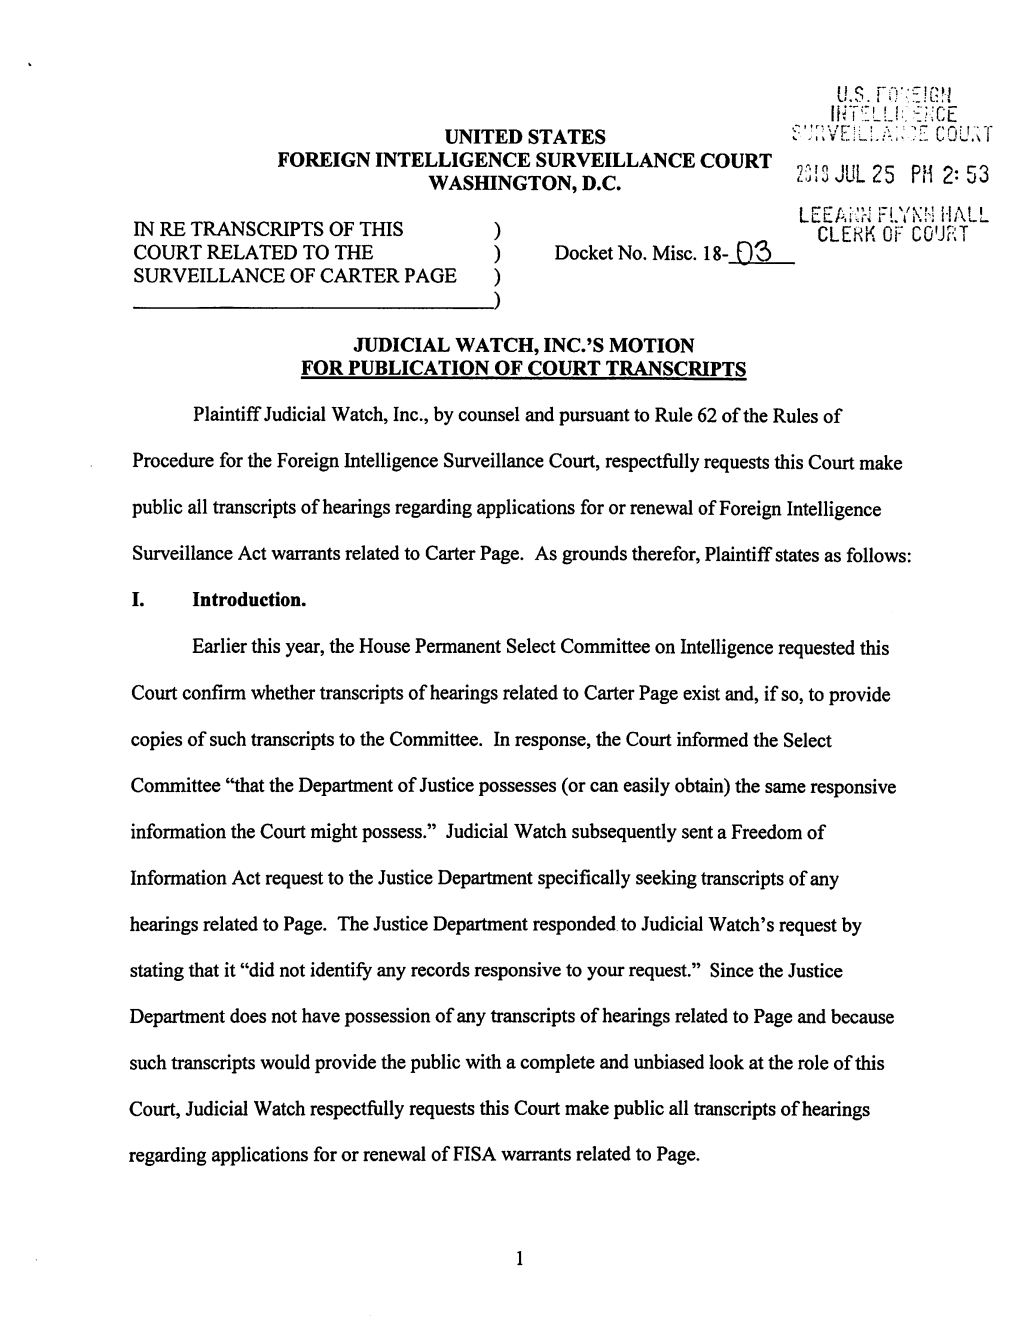 FISC Misc 18-03 Judicial Watch Inc's Motion for Publication of Transcripts 180725.Pdf